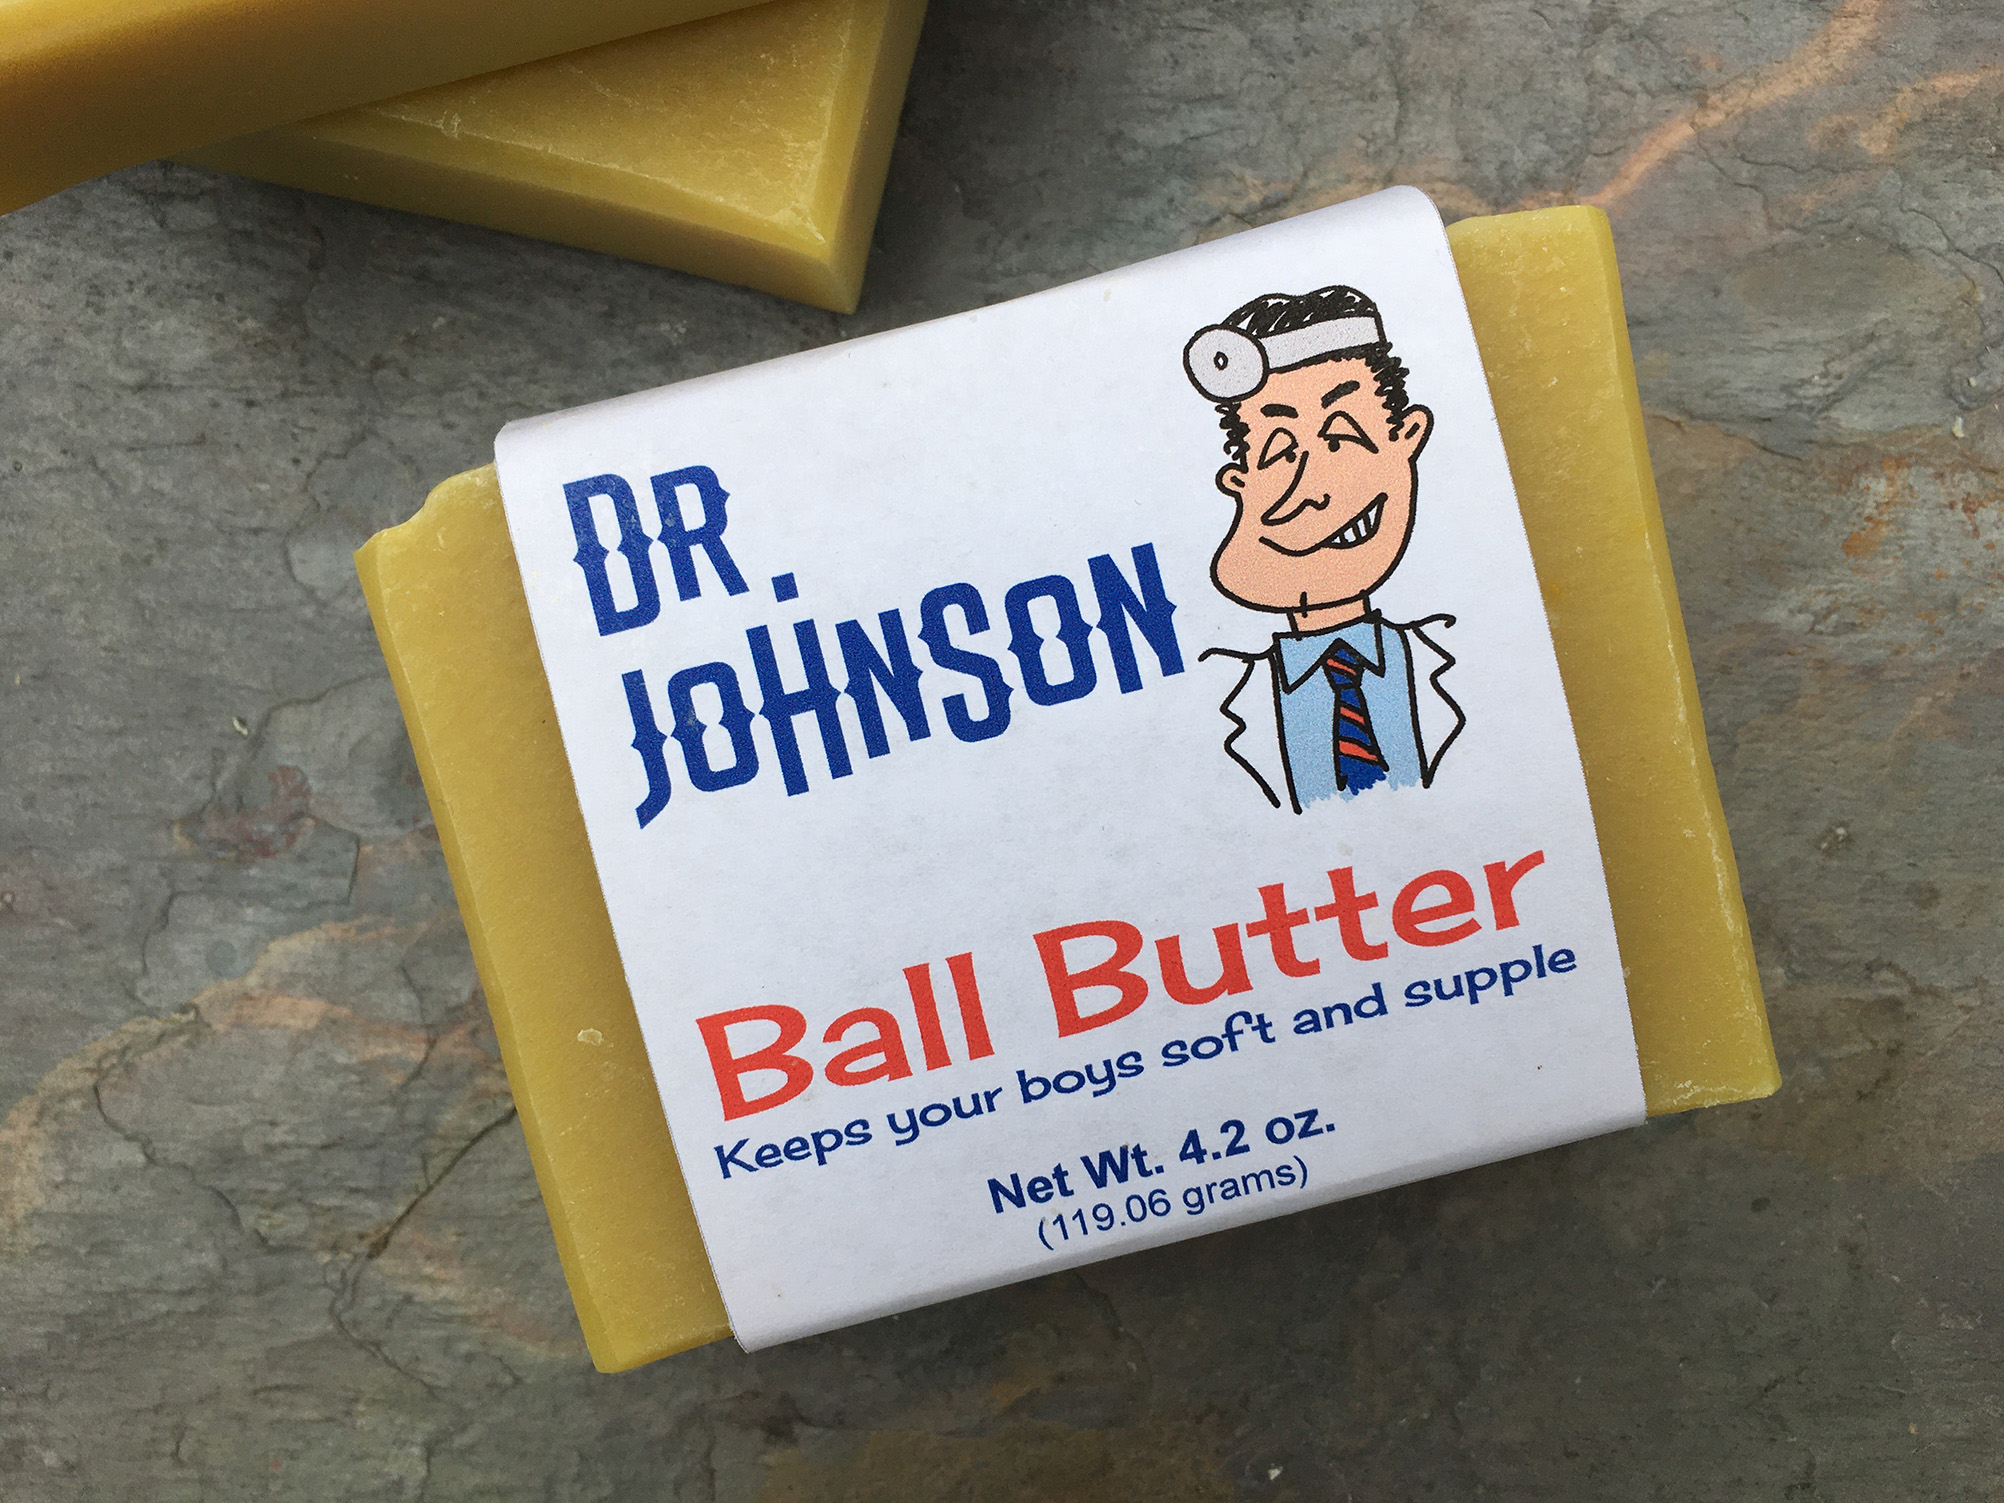 Dr. Johnson Ball Butter-Body Bar for Men - Click to
Enlarge Photo